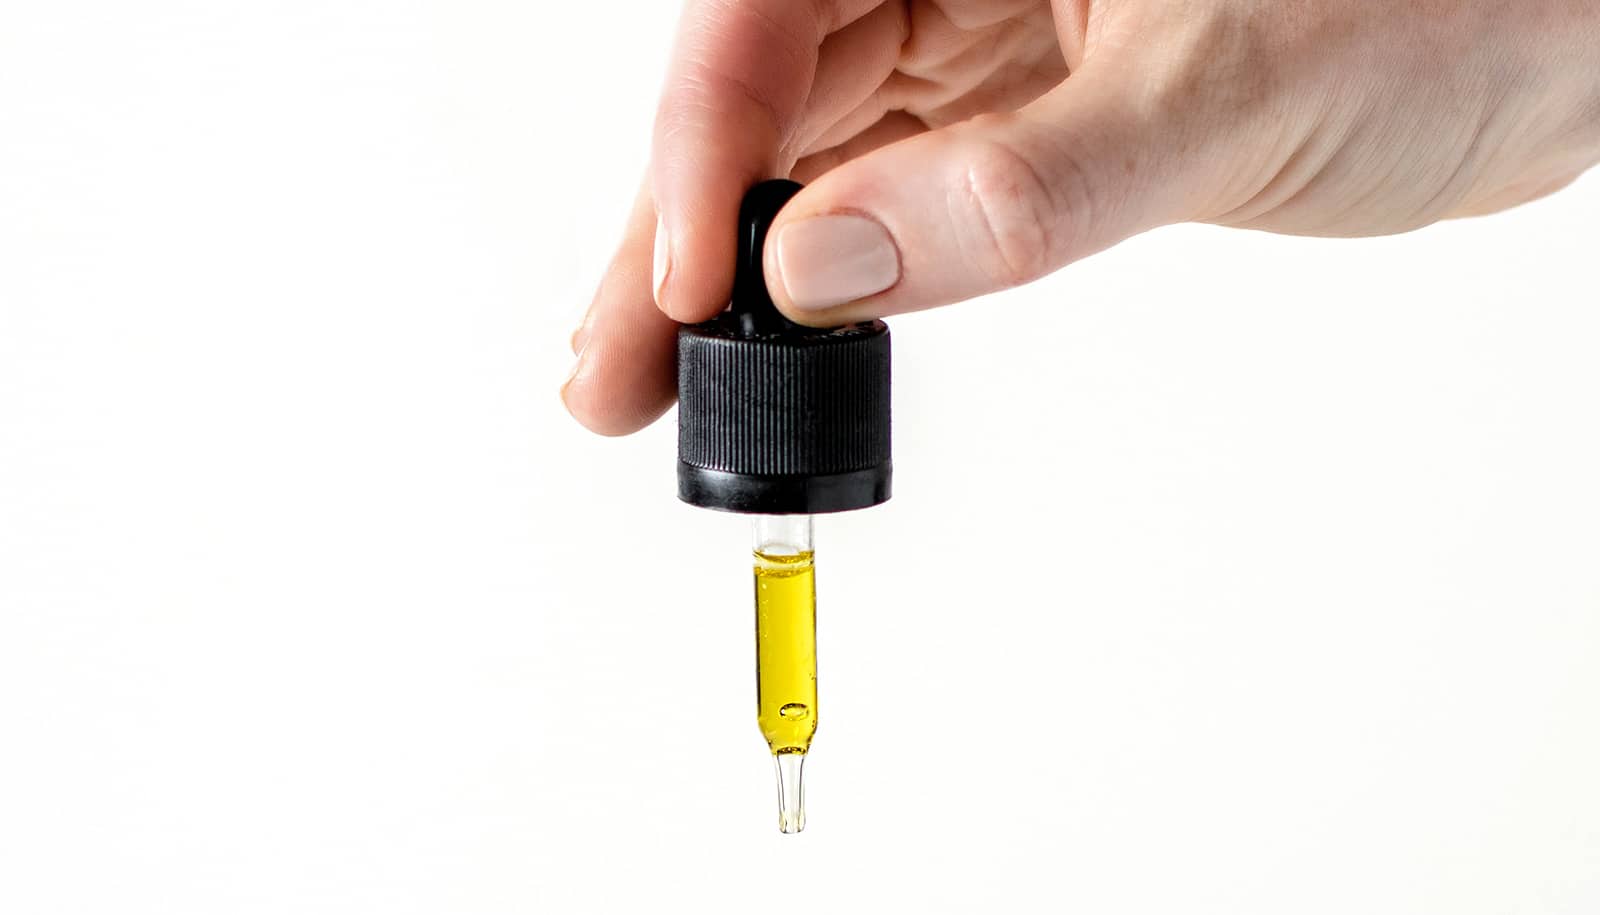 A person uses a dropper with CBD oil in it against a white background.